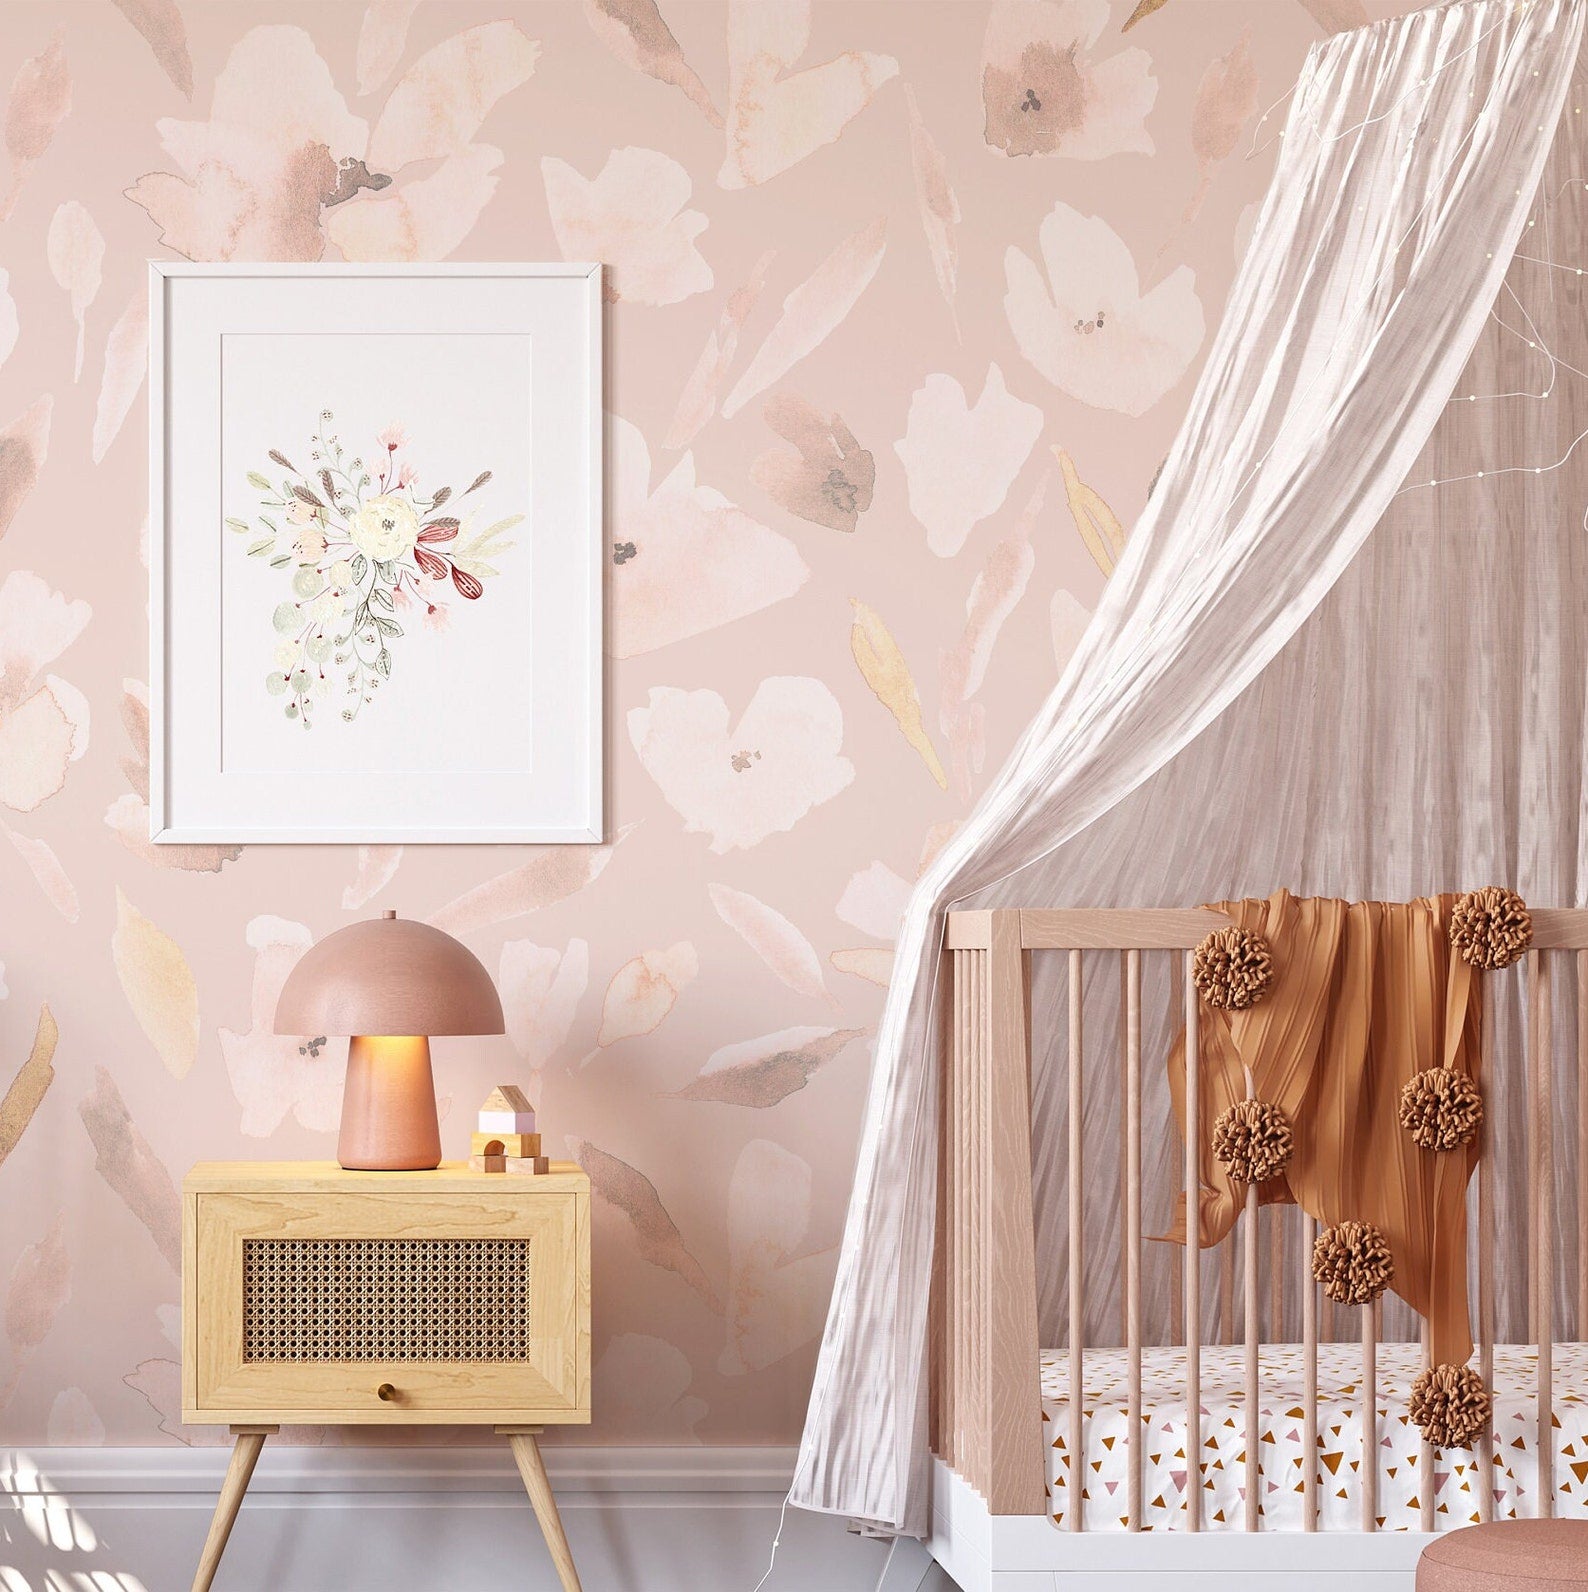 A nursery wall adorned with the Prettiest in Pink Floral Wallpaper, highlighting the gentle watercolor floral pattern, which provides a backdrop for a modern crib and a stylish wooden stool, together creating a tranquil and stylish baby's room